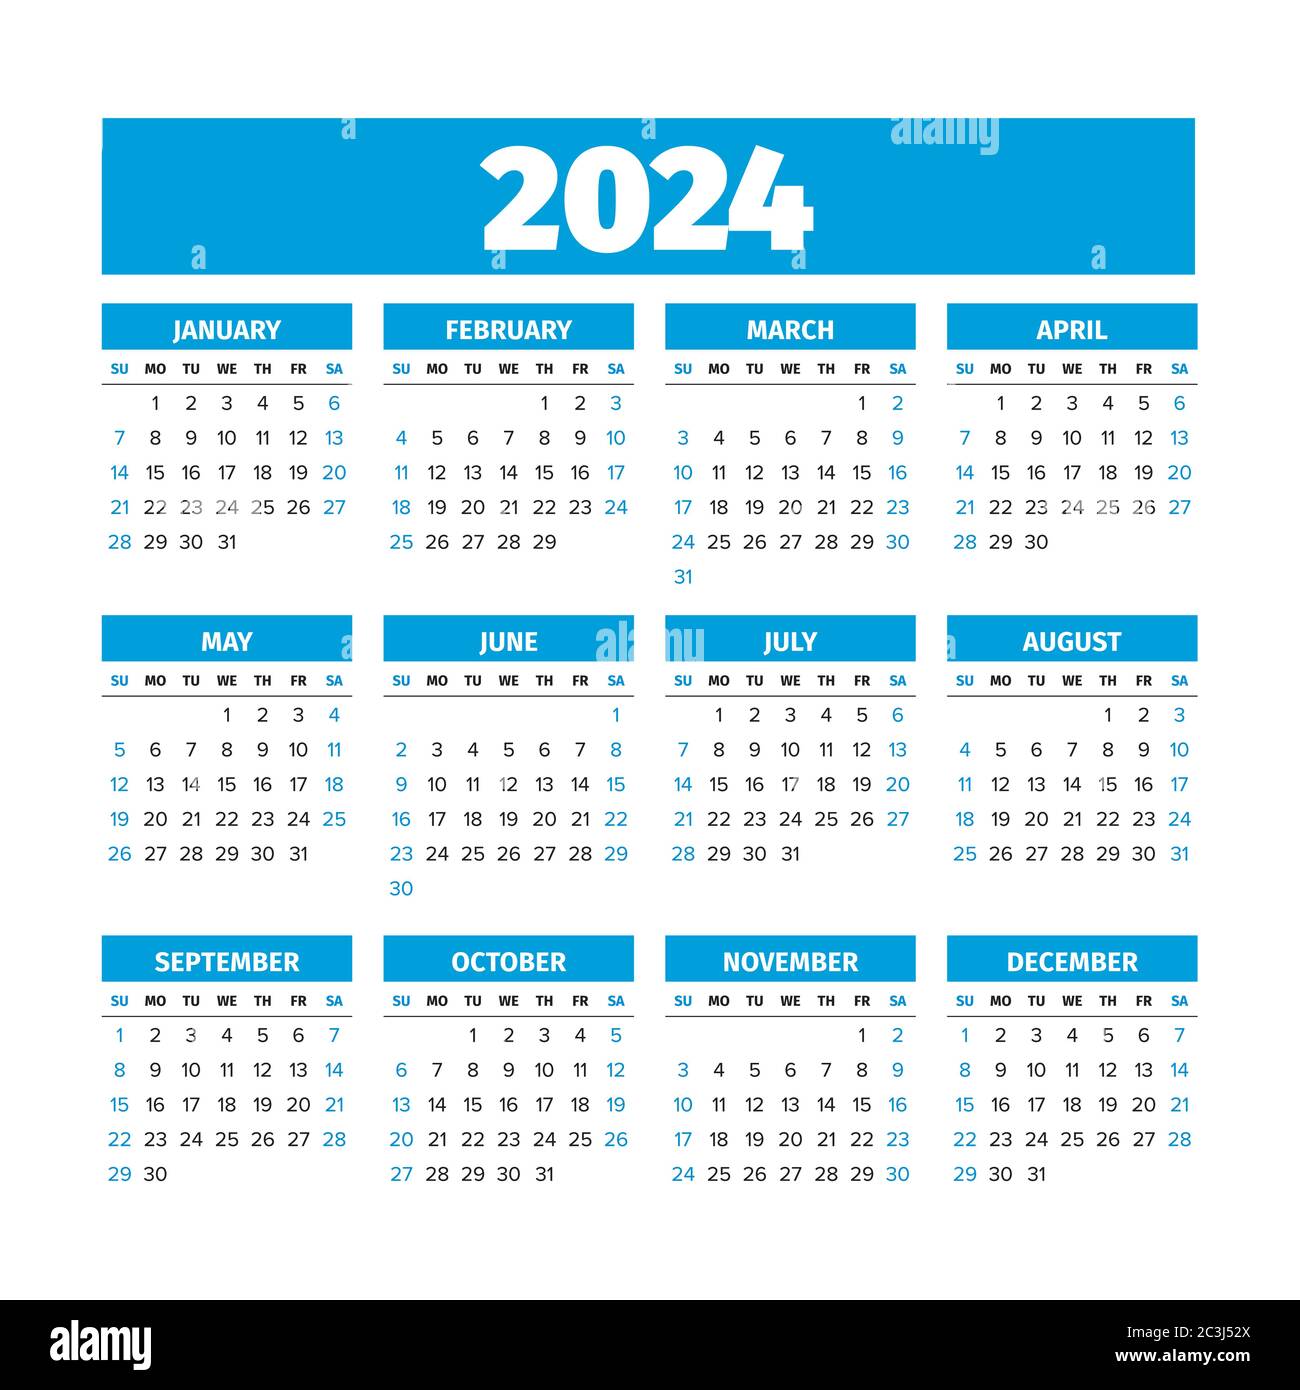 2024 Calendar With Weeks Numbered Mame Stacee